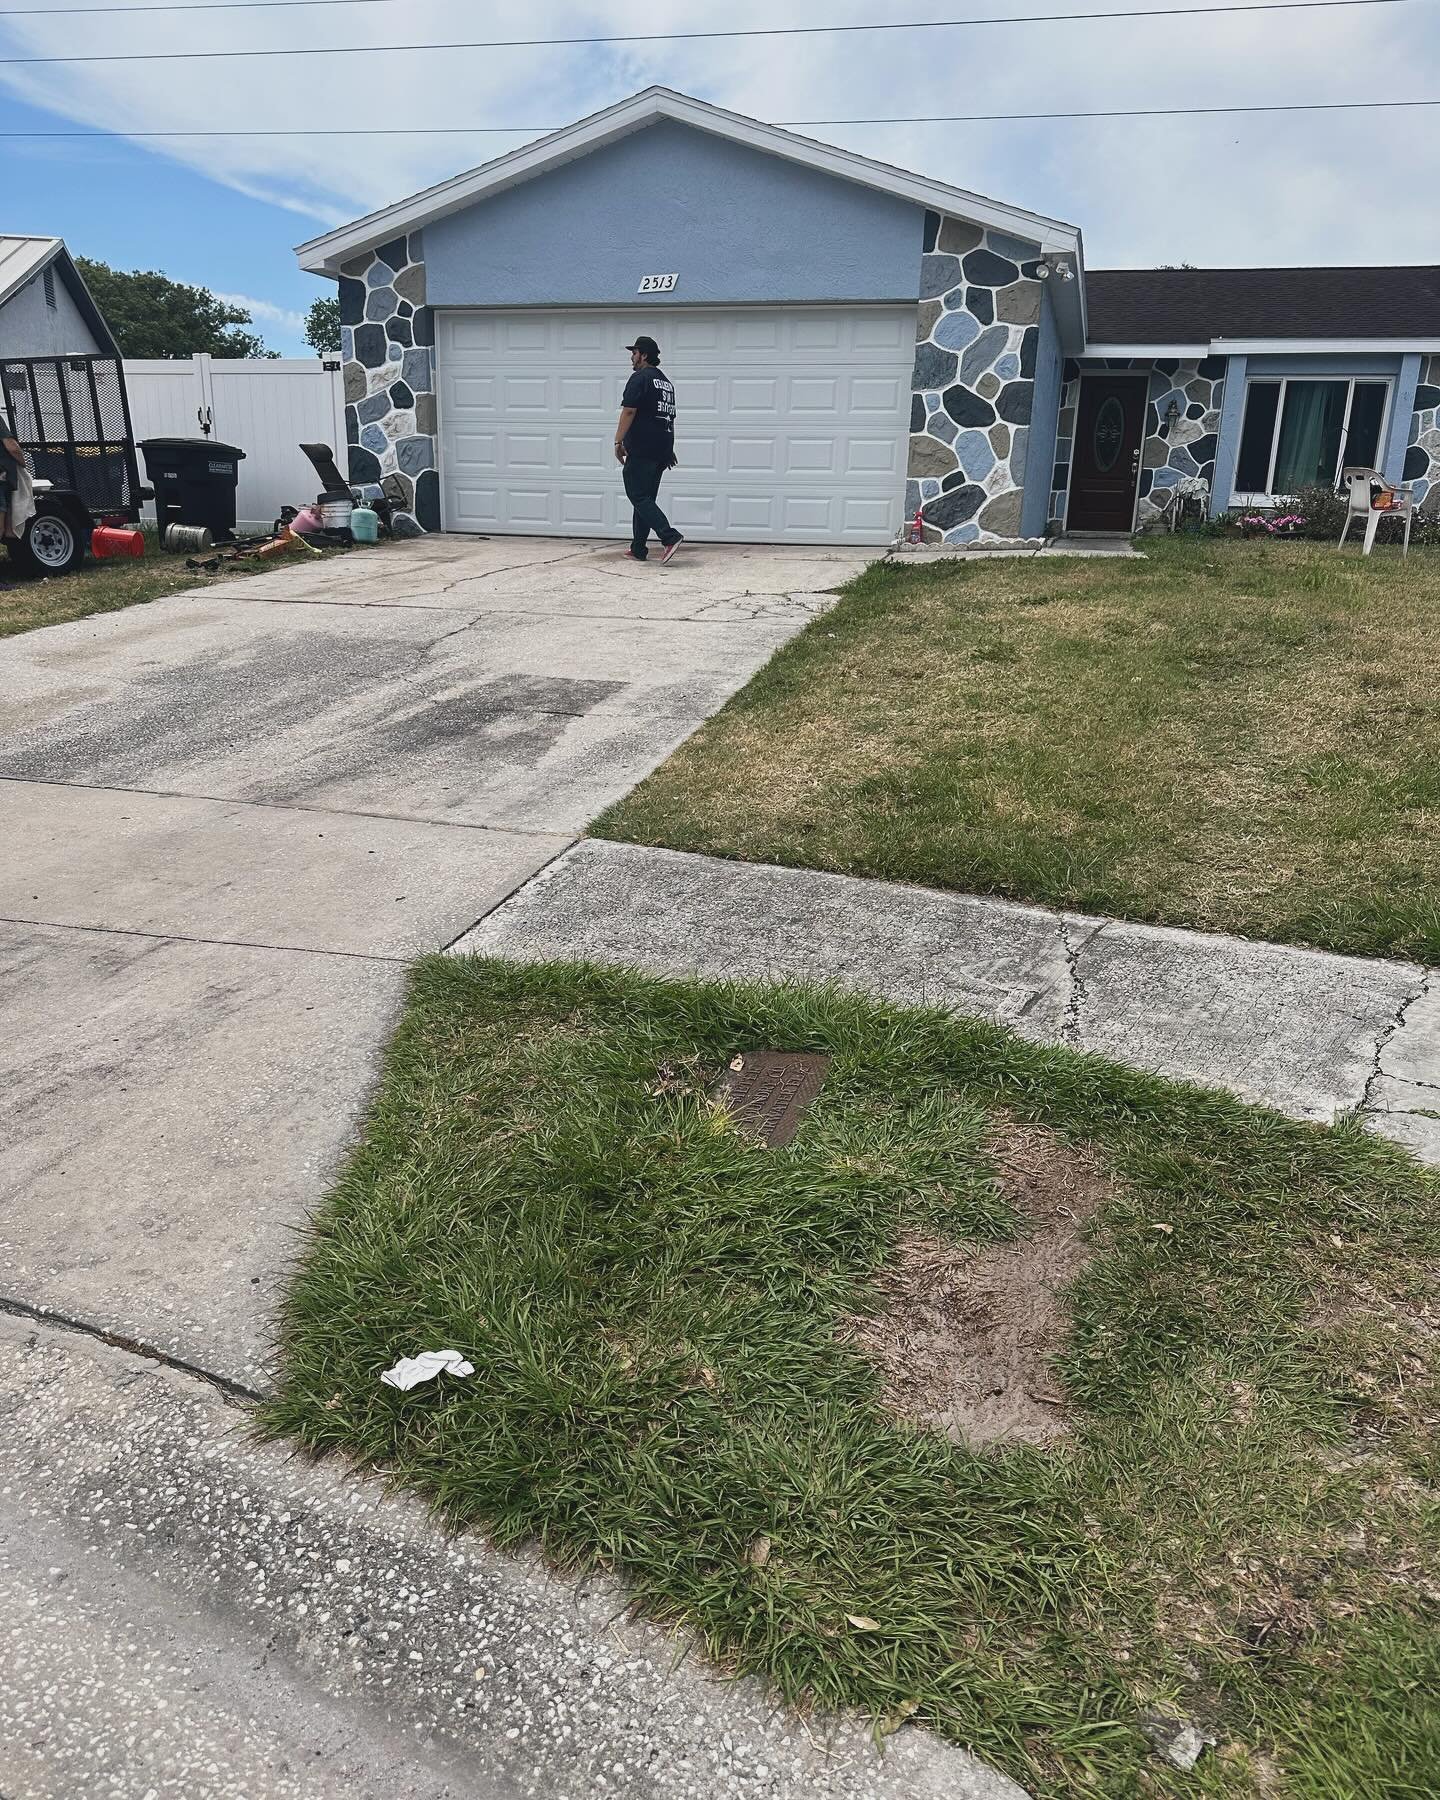 Pinellas Soft Wash LLC new business we give free quotes and have great prices, if you need side walks, driveways, house walls, roofs and more. If you've been considering getting a pressure washing or soft washing job done give us a call at 727-244-40